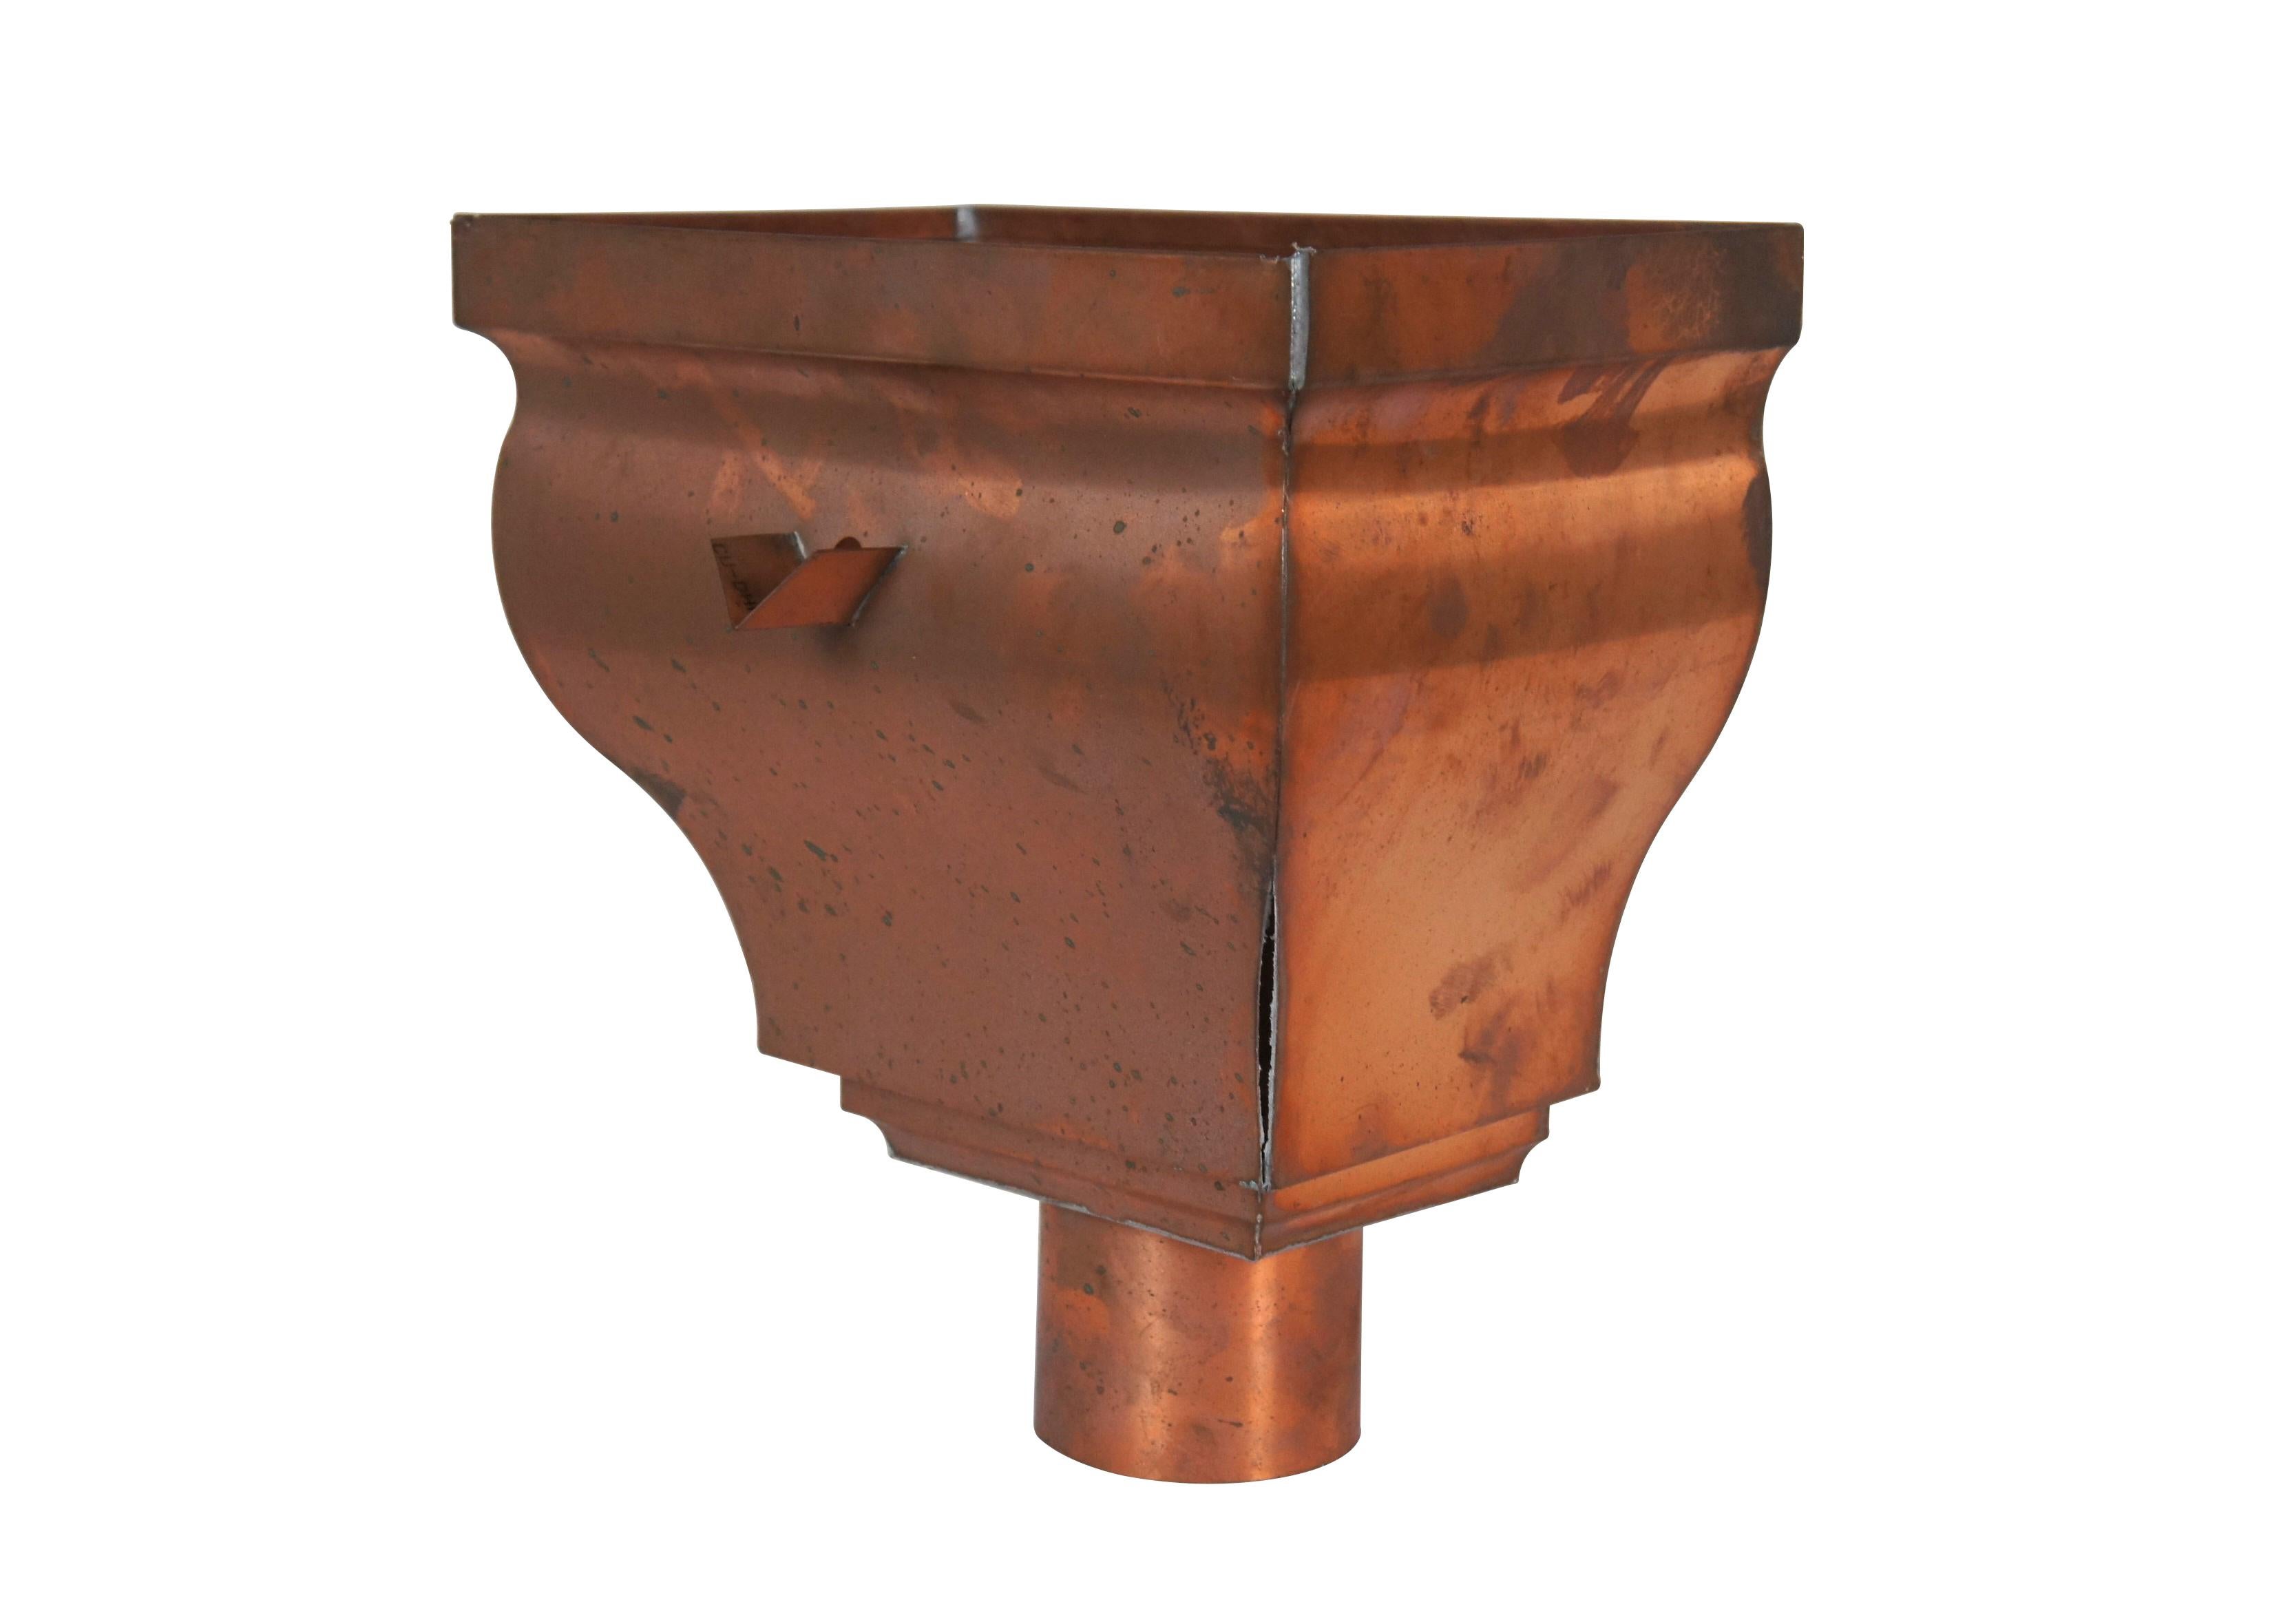 Late 20th century copper gutter leader head / leader box / hopper with triangular overflow spout. Possibly a Minoletti Deluxe. Stamped CU-DHP R24. Base Diameter 4